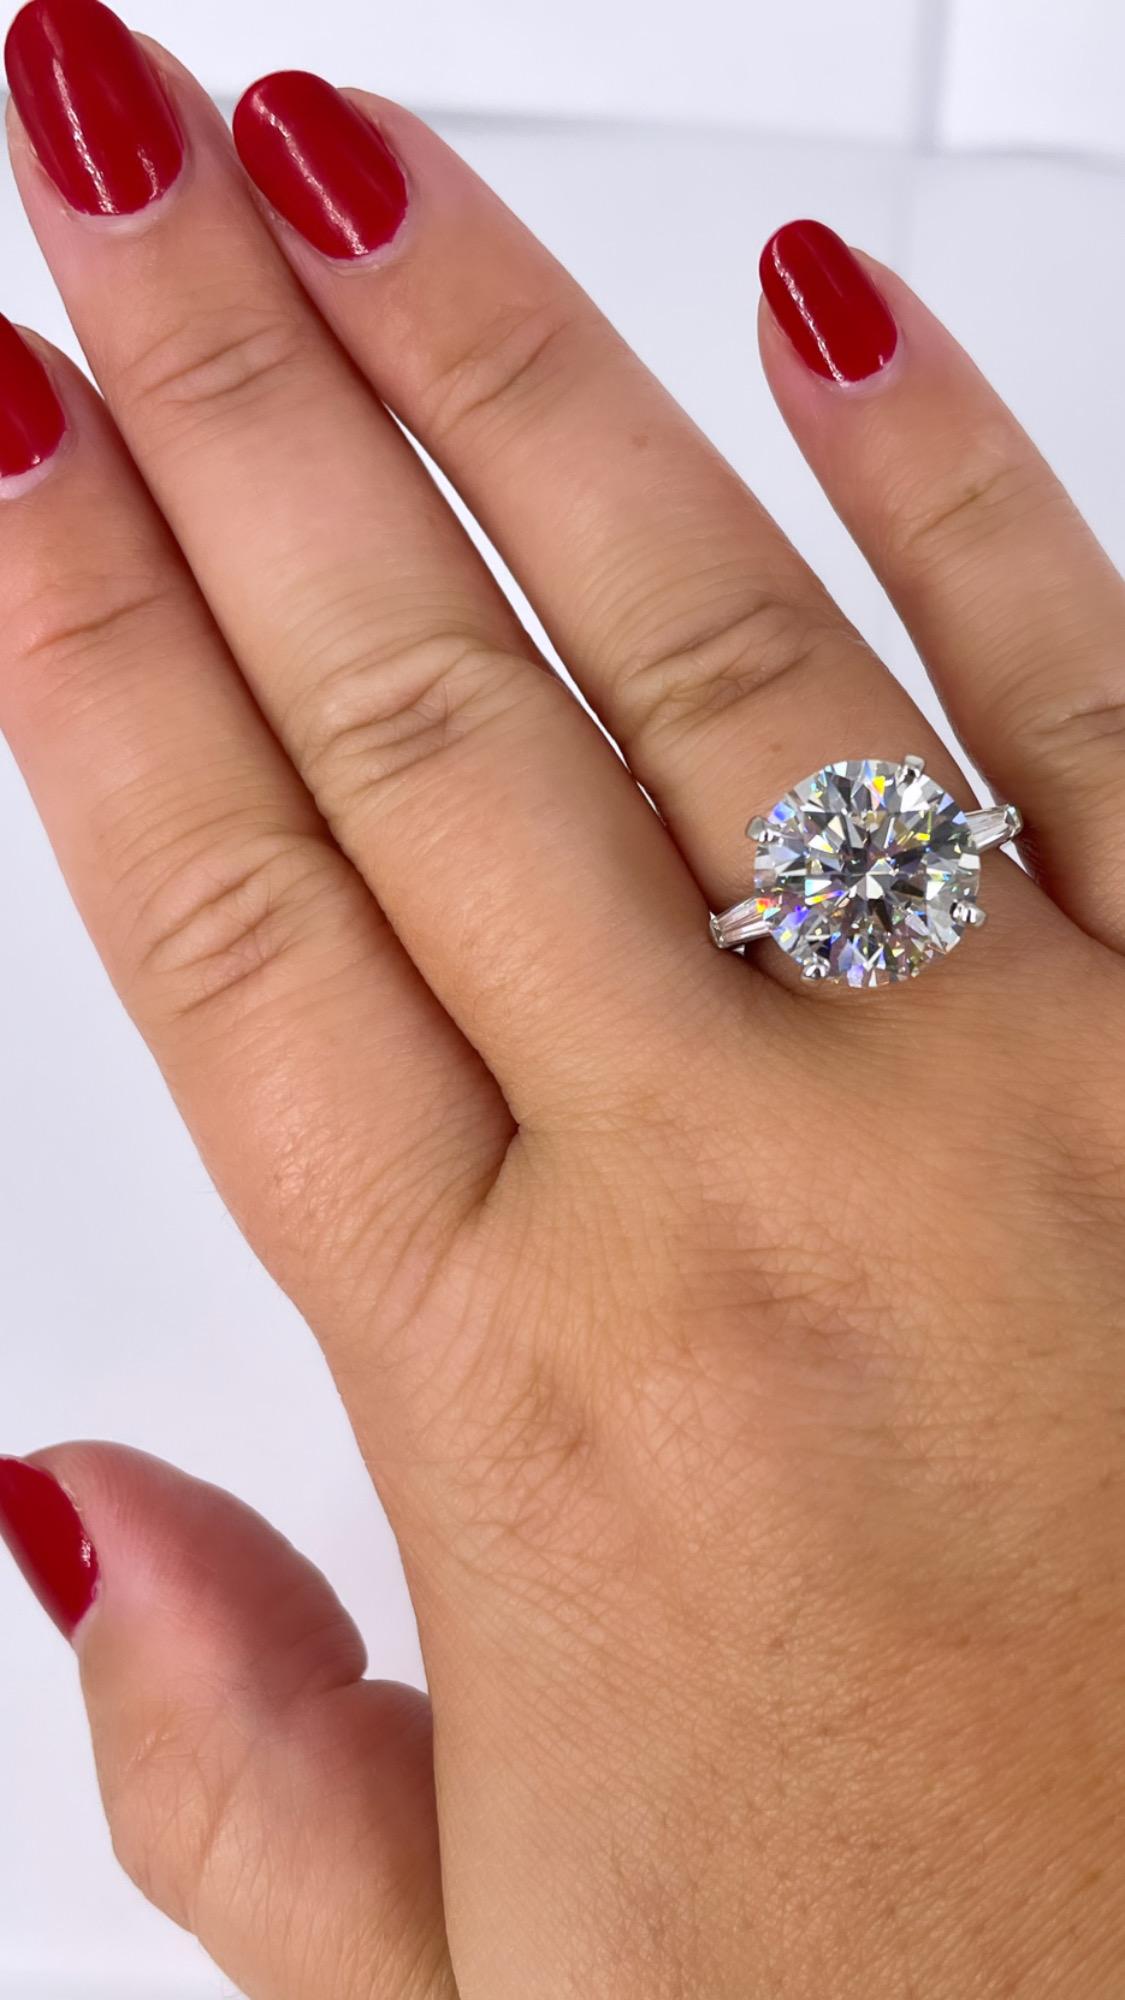 A stunning take on a classic design, this 7.33 carat round diamond with petite tapered baguettes by J. Birnbach is a modern version of a timeless style. The delicate tapered baguettes are a subtle accent of sparkle and allow the center diamond to be